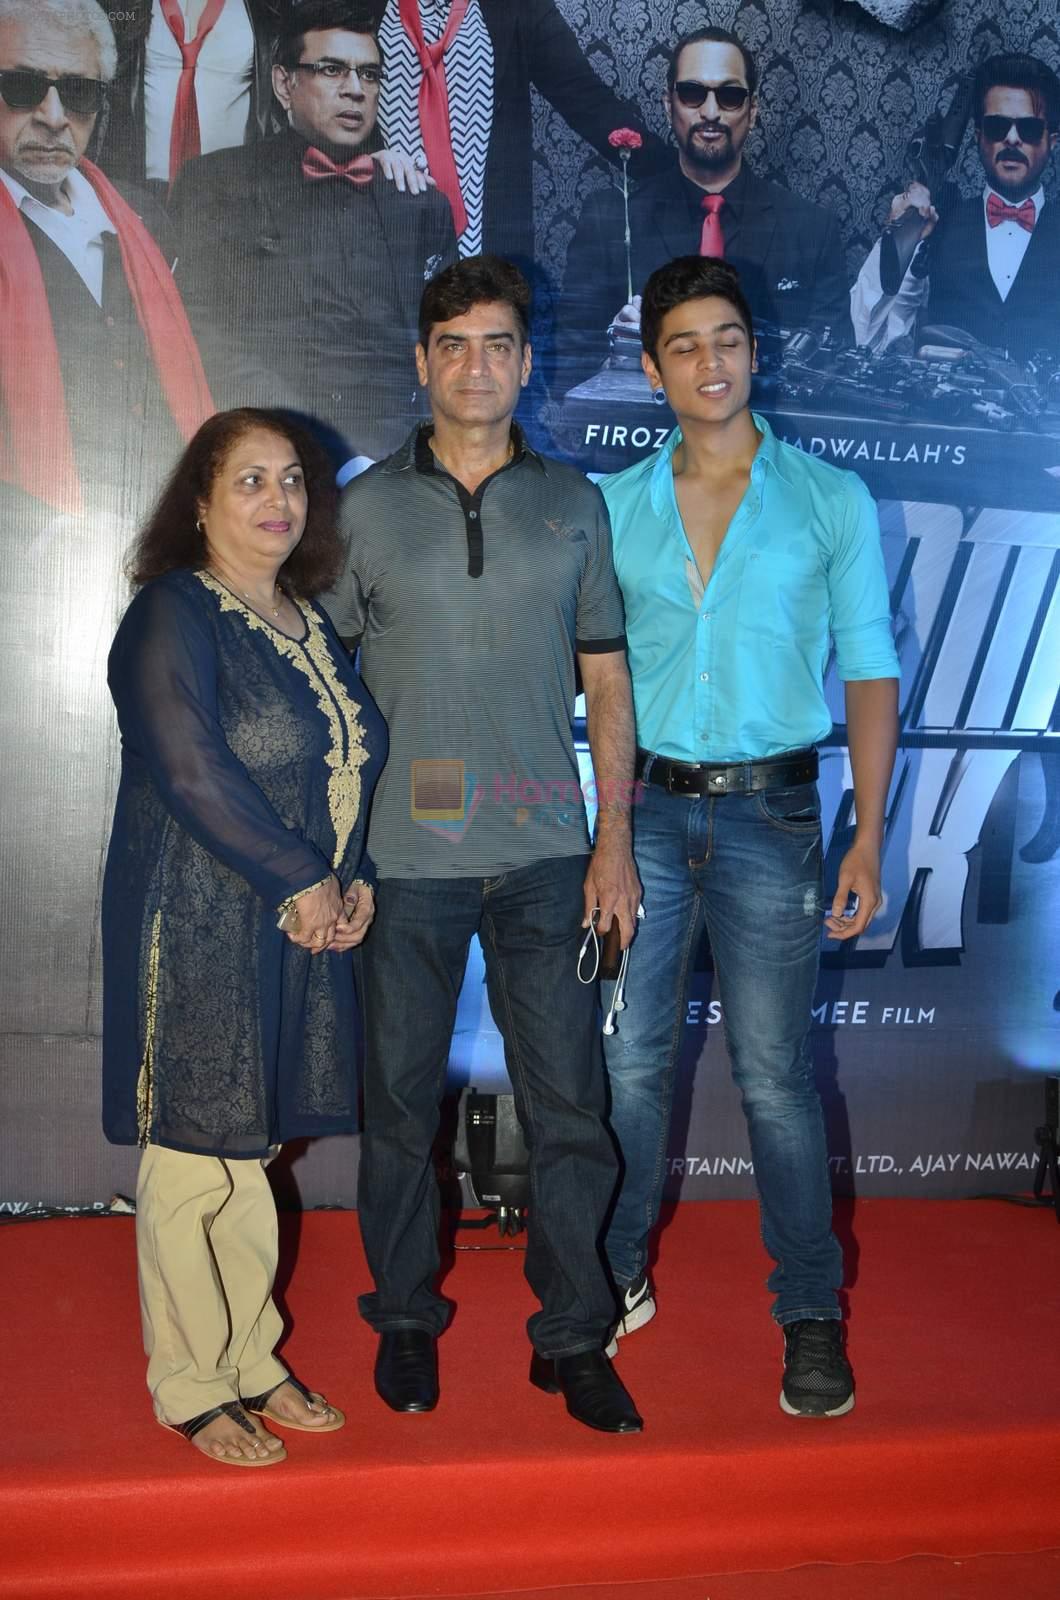 at welcome back premiere in Mumbai on 3rd  Sept 2015